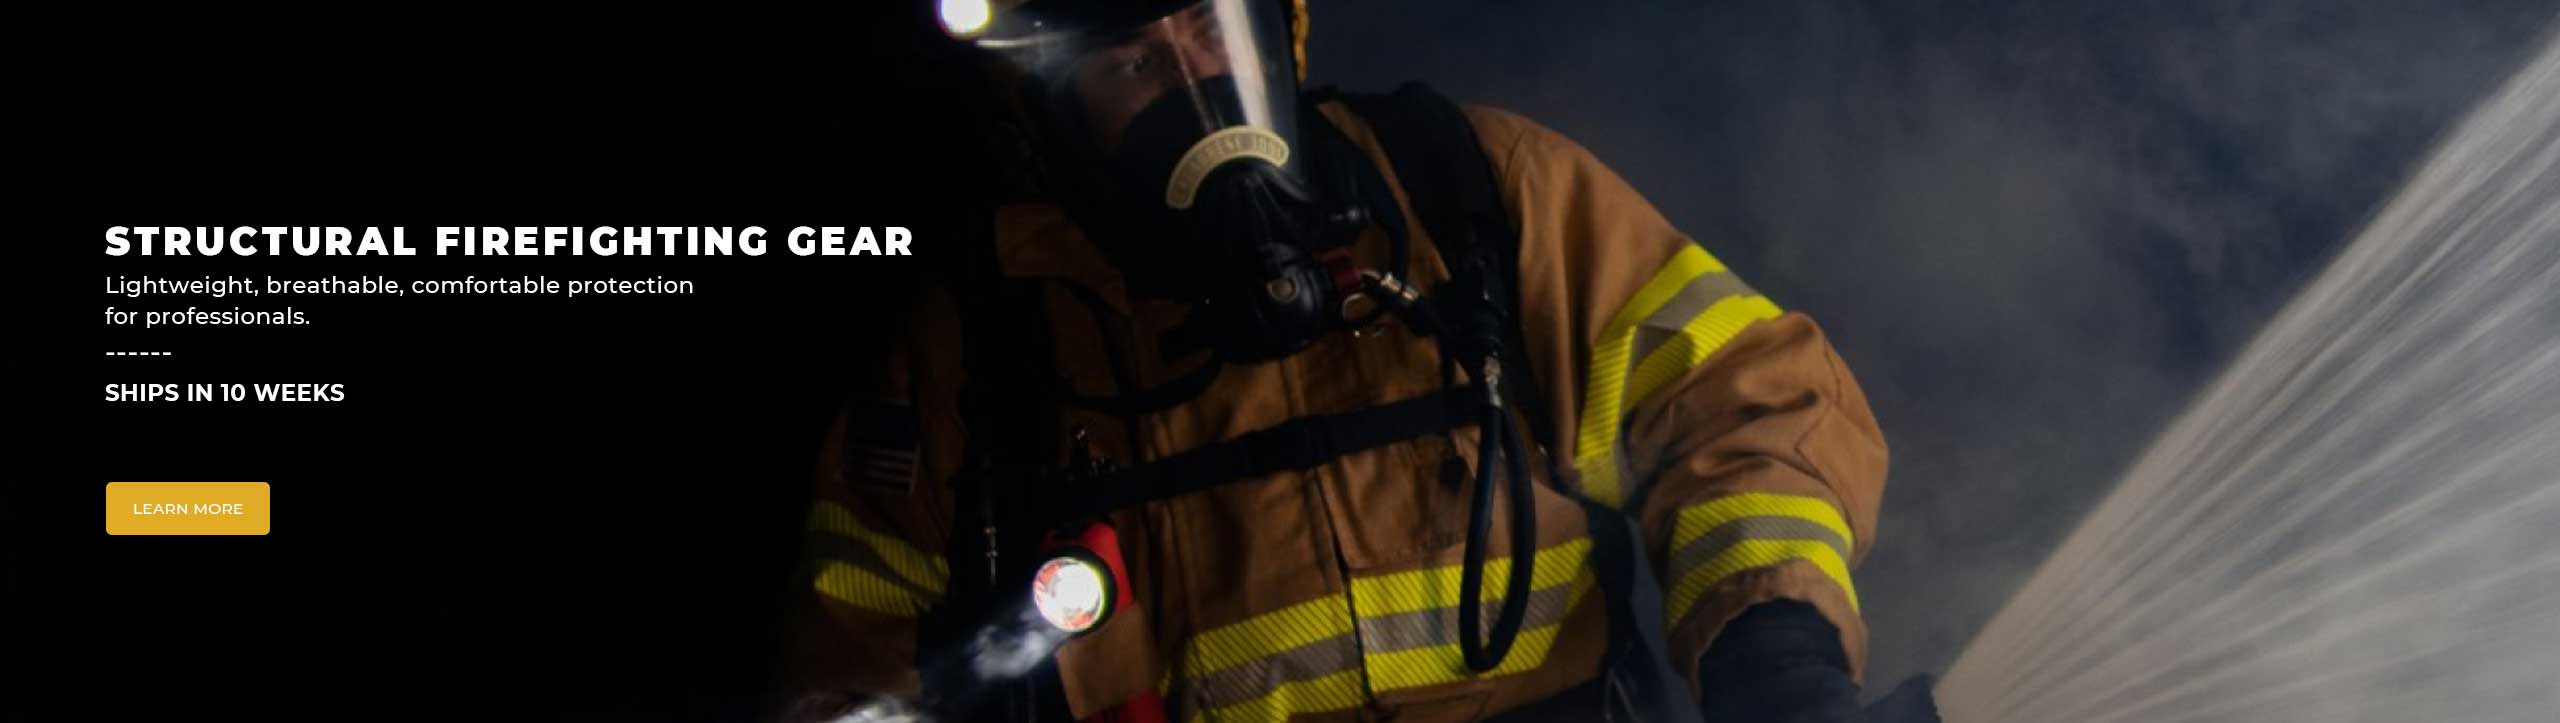 Structural Firefighting Gear - Ships in 10 Weeks - Learn More